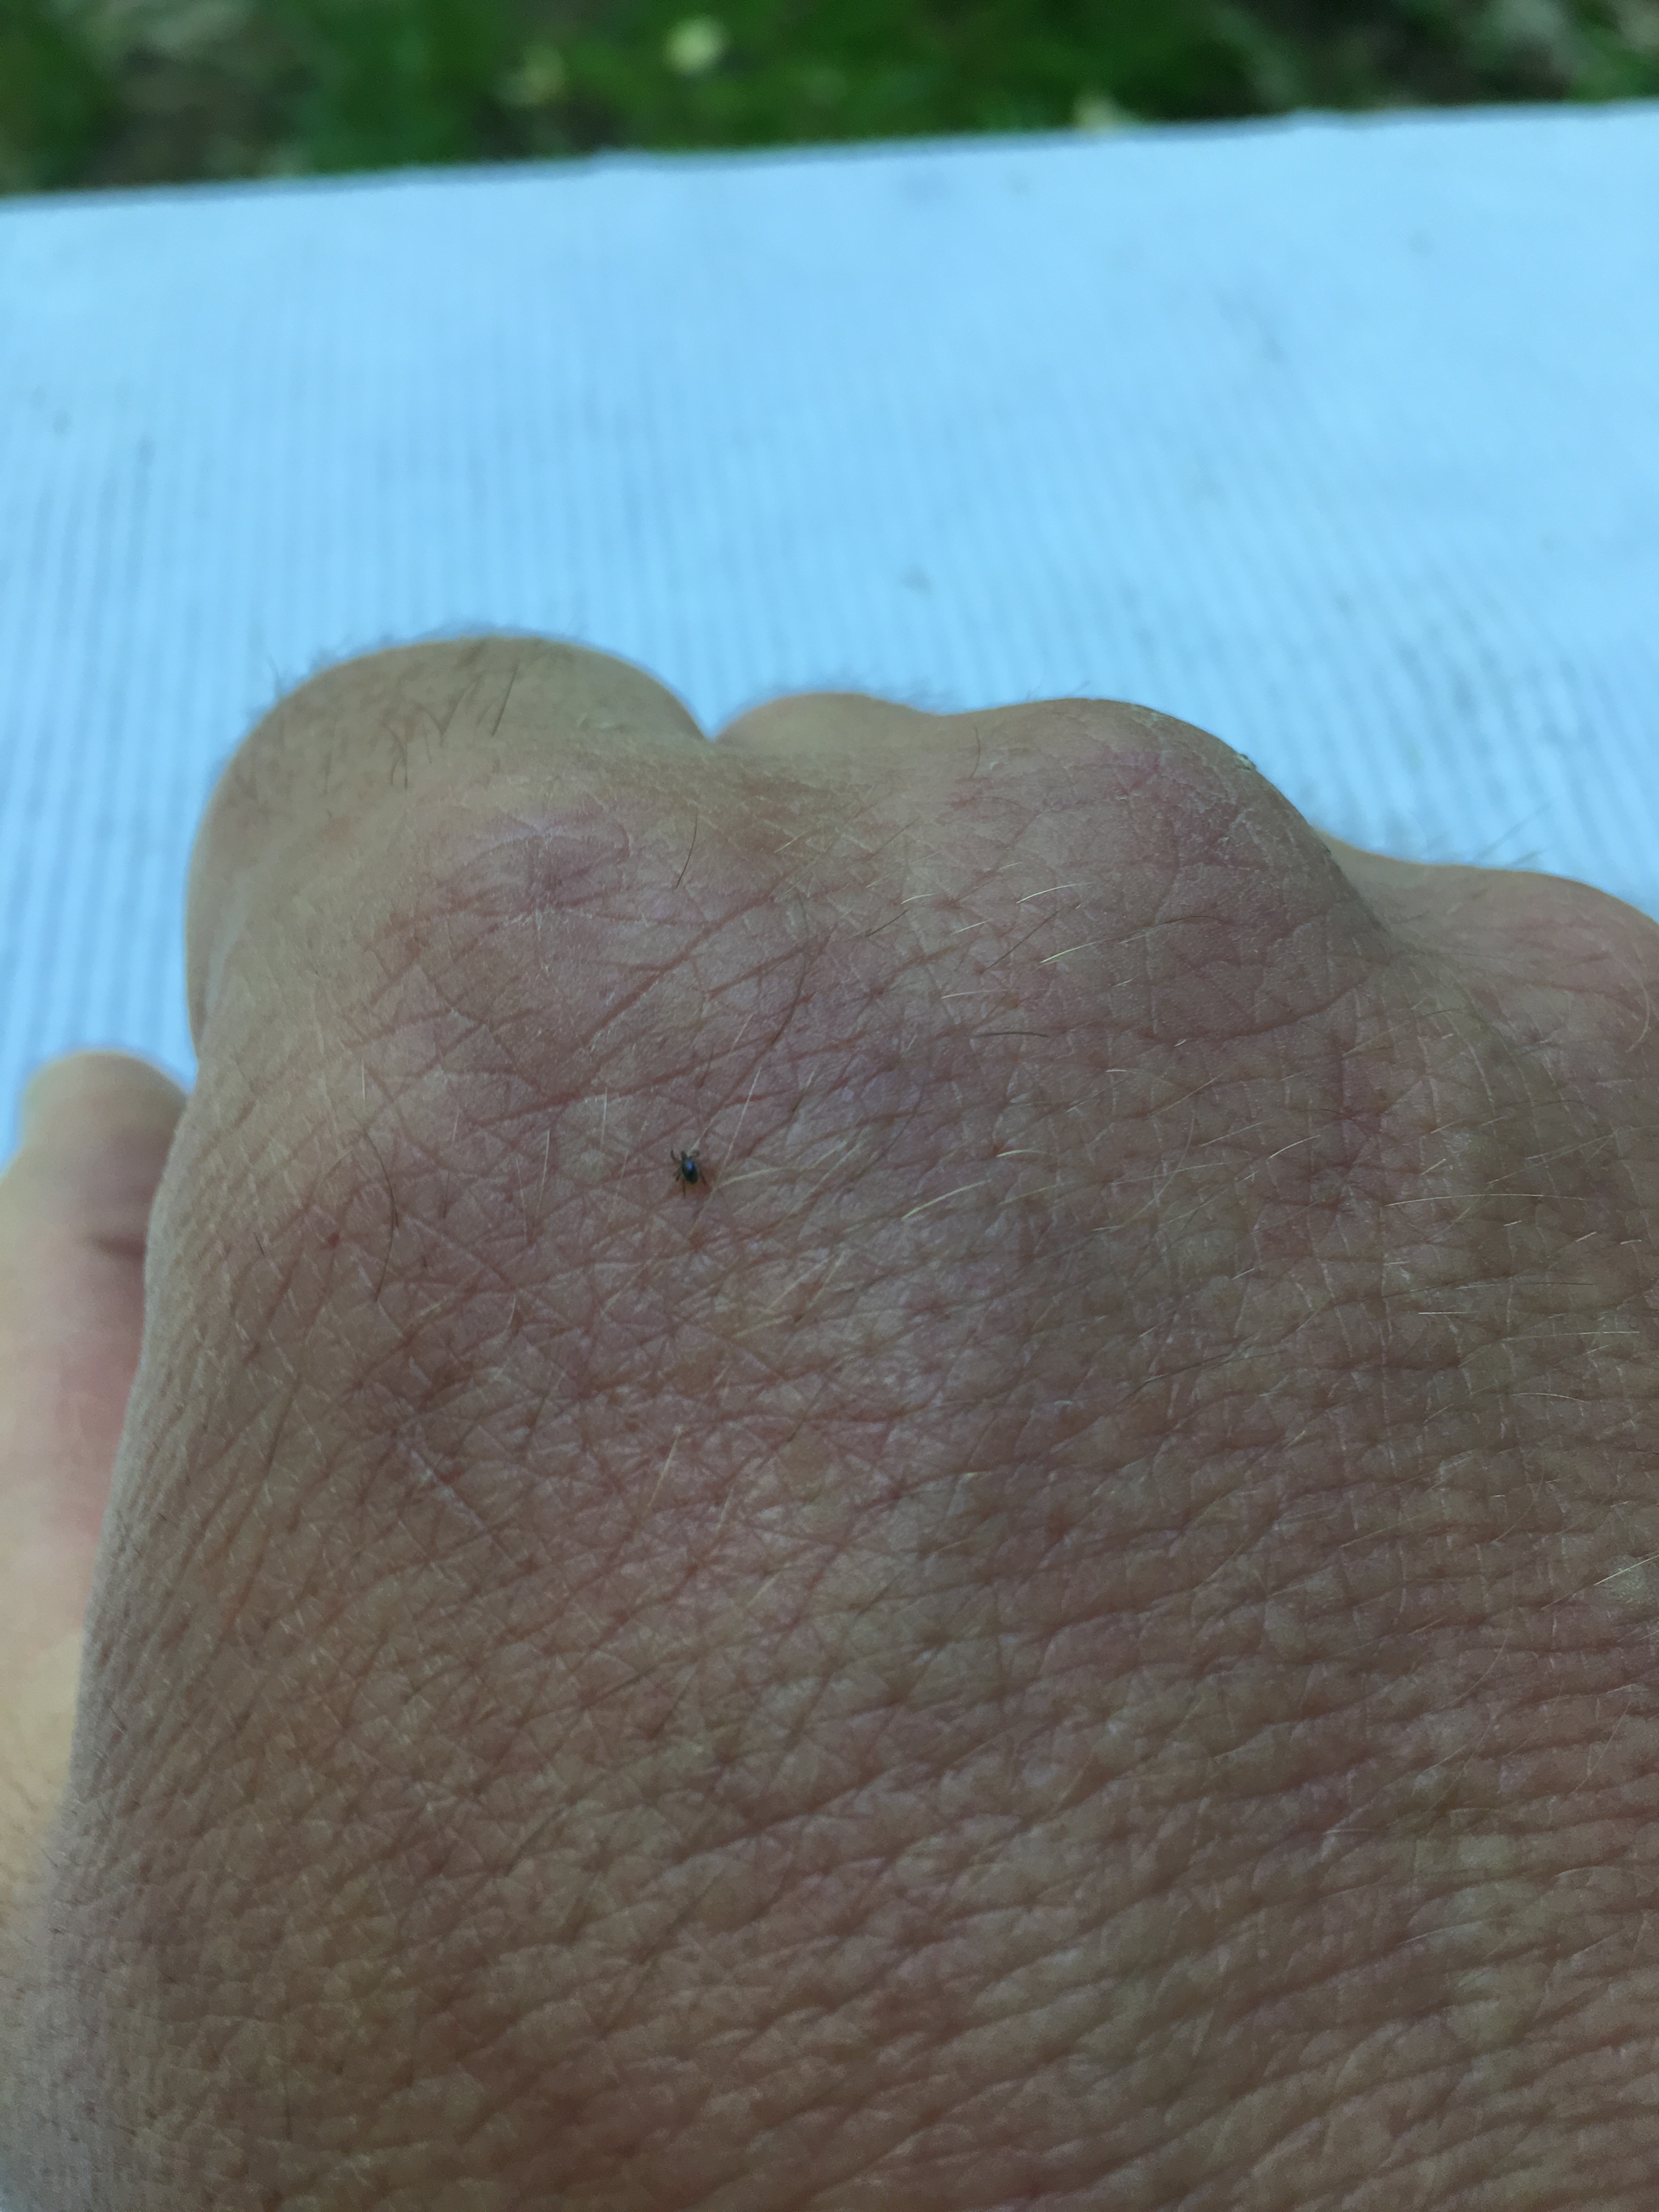 Ixodes scapularis nymphs are extremely small and may be difficult to see, as depicted in this photo of a nymph on the back of a human hand. Photo: Lee Green, Indiana State Department of Health.